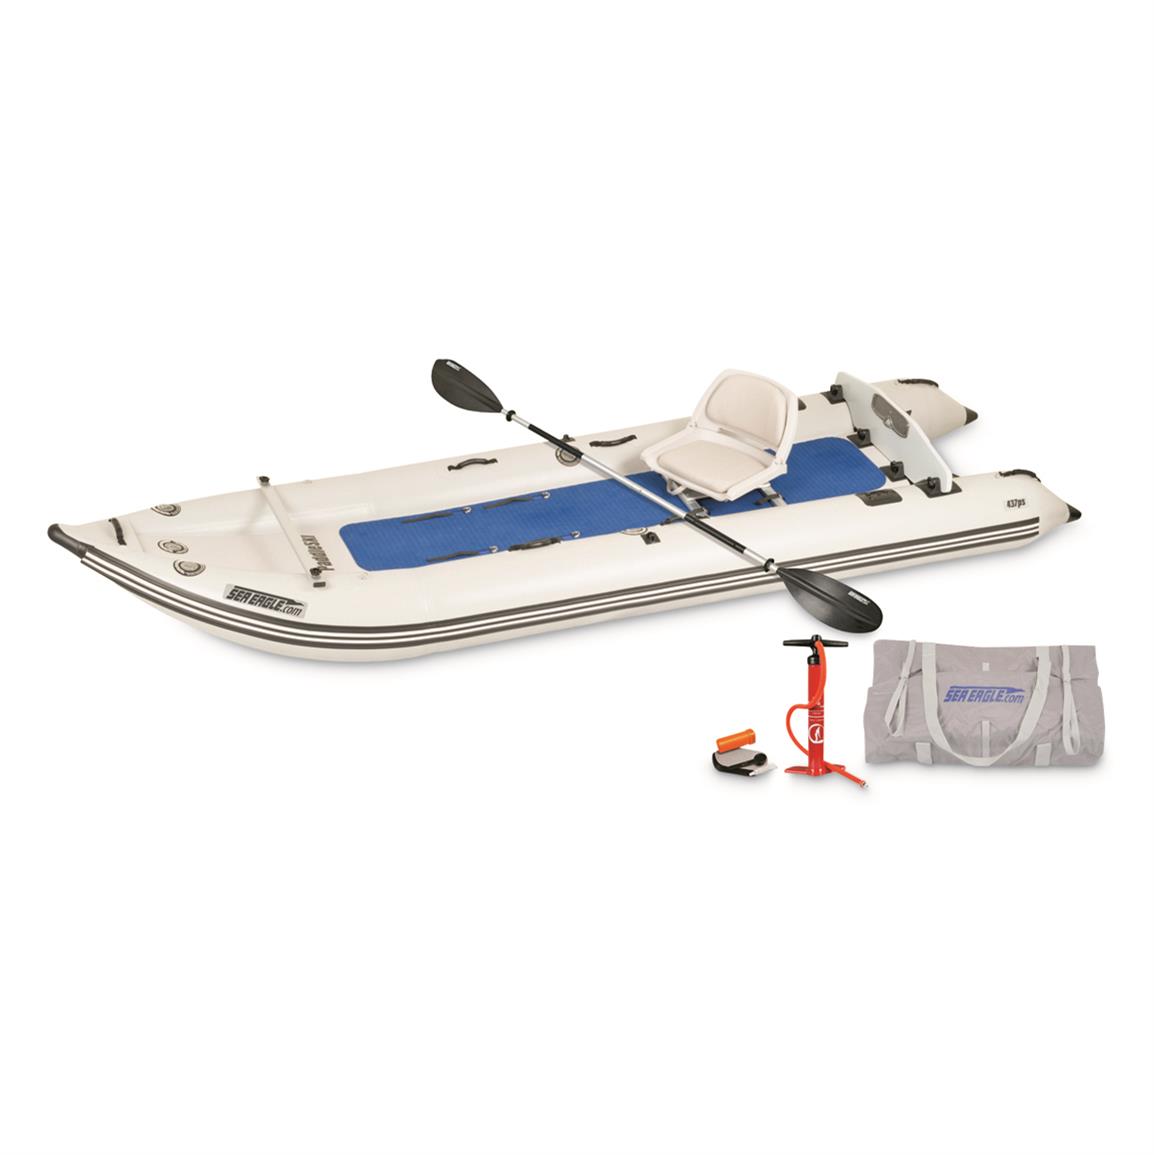 The Colorado XT Pontoon - 148597, Small Craft & Inflatable Boats at  Sportsman's Guide